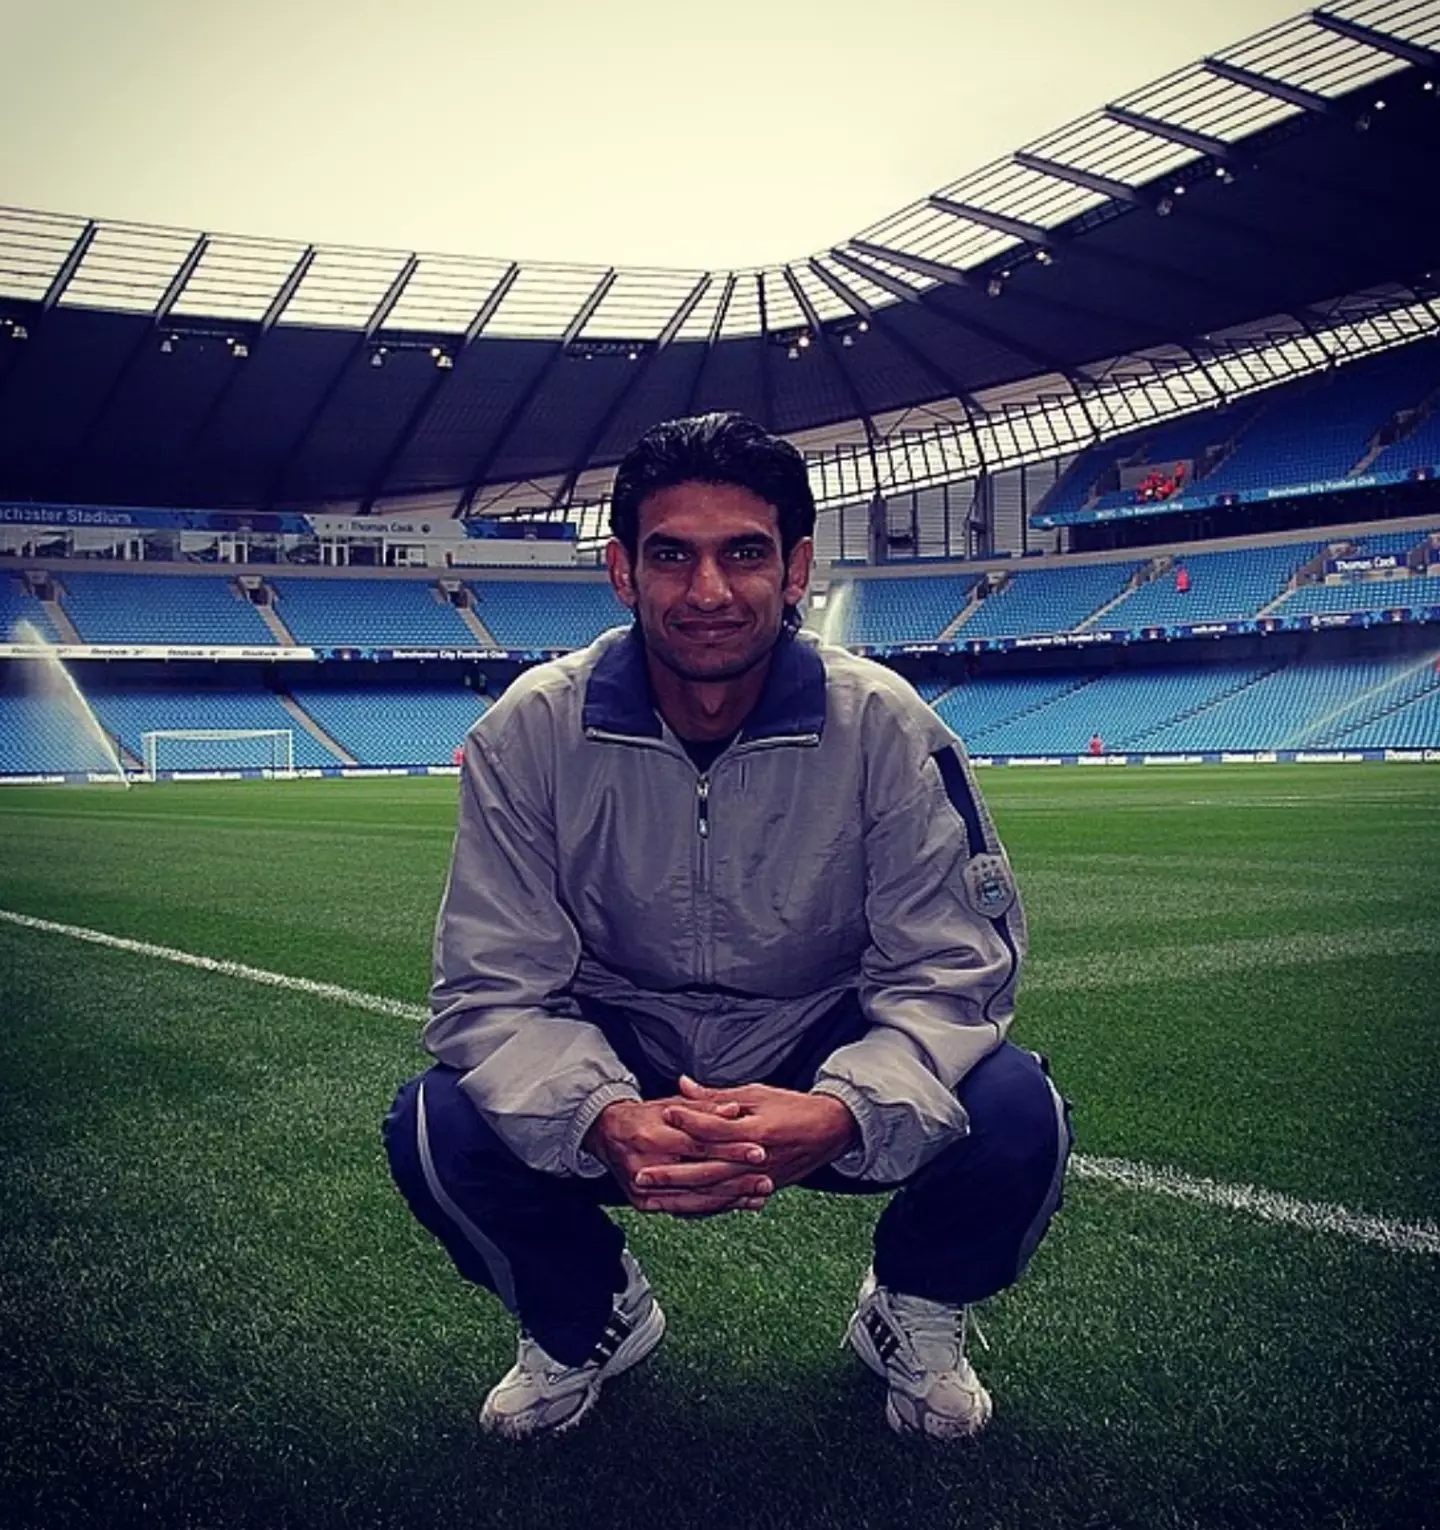 Hussein Yasser at the Etihad stadium after signing for Manchester City. 